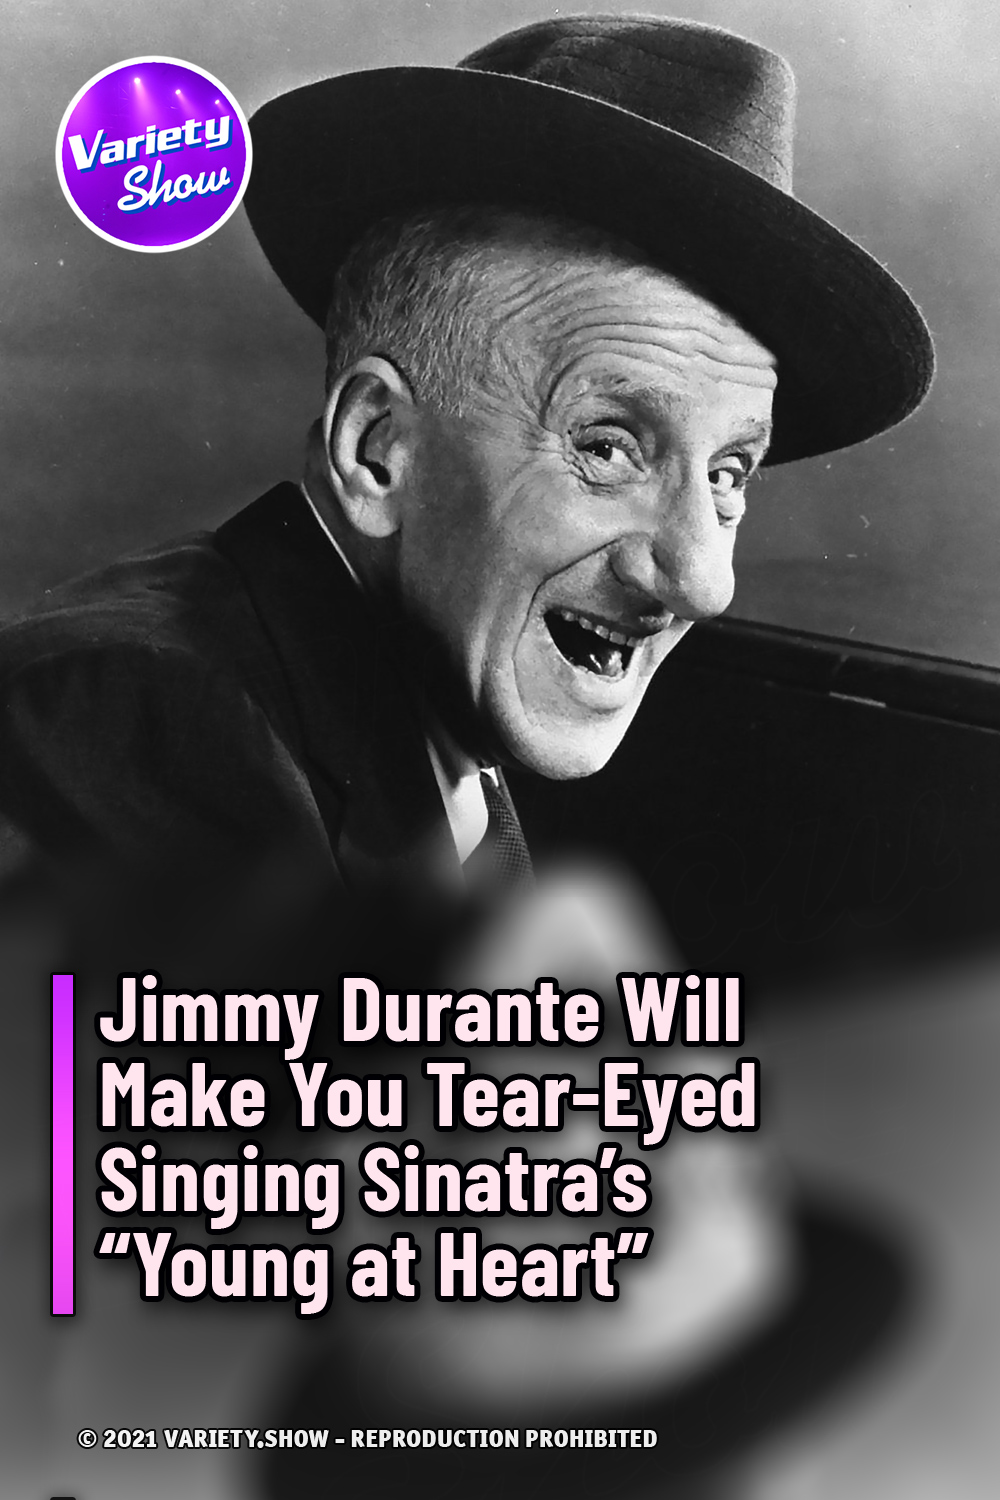 Jimmy Durante Will Make You Tear-Eyed Singing Sinatra’s “Young at Heart”